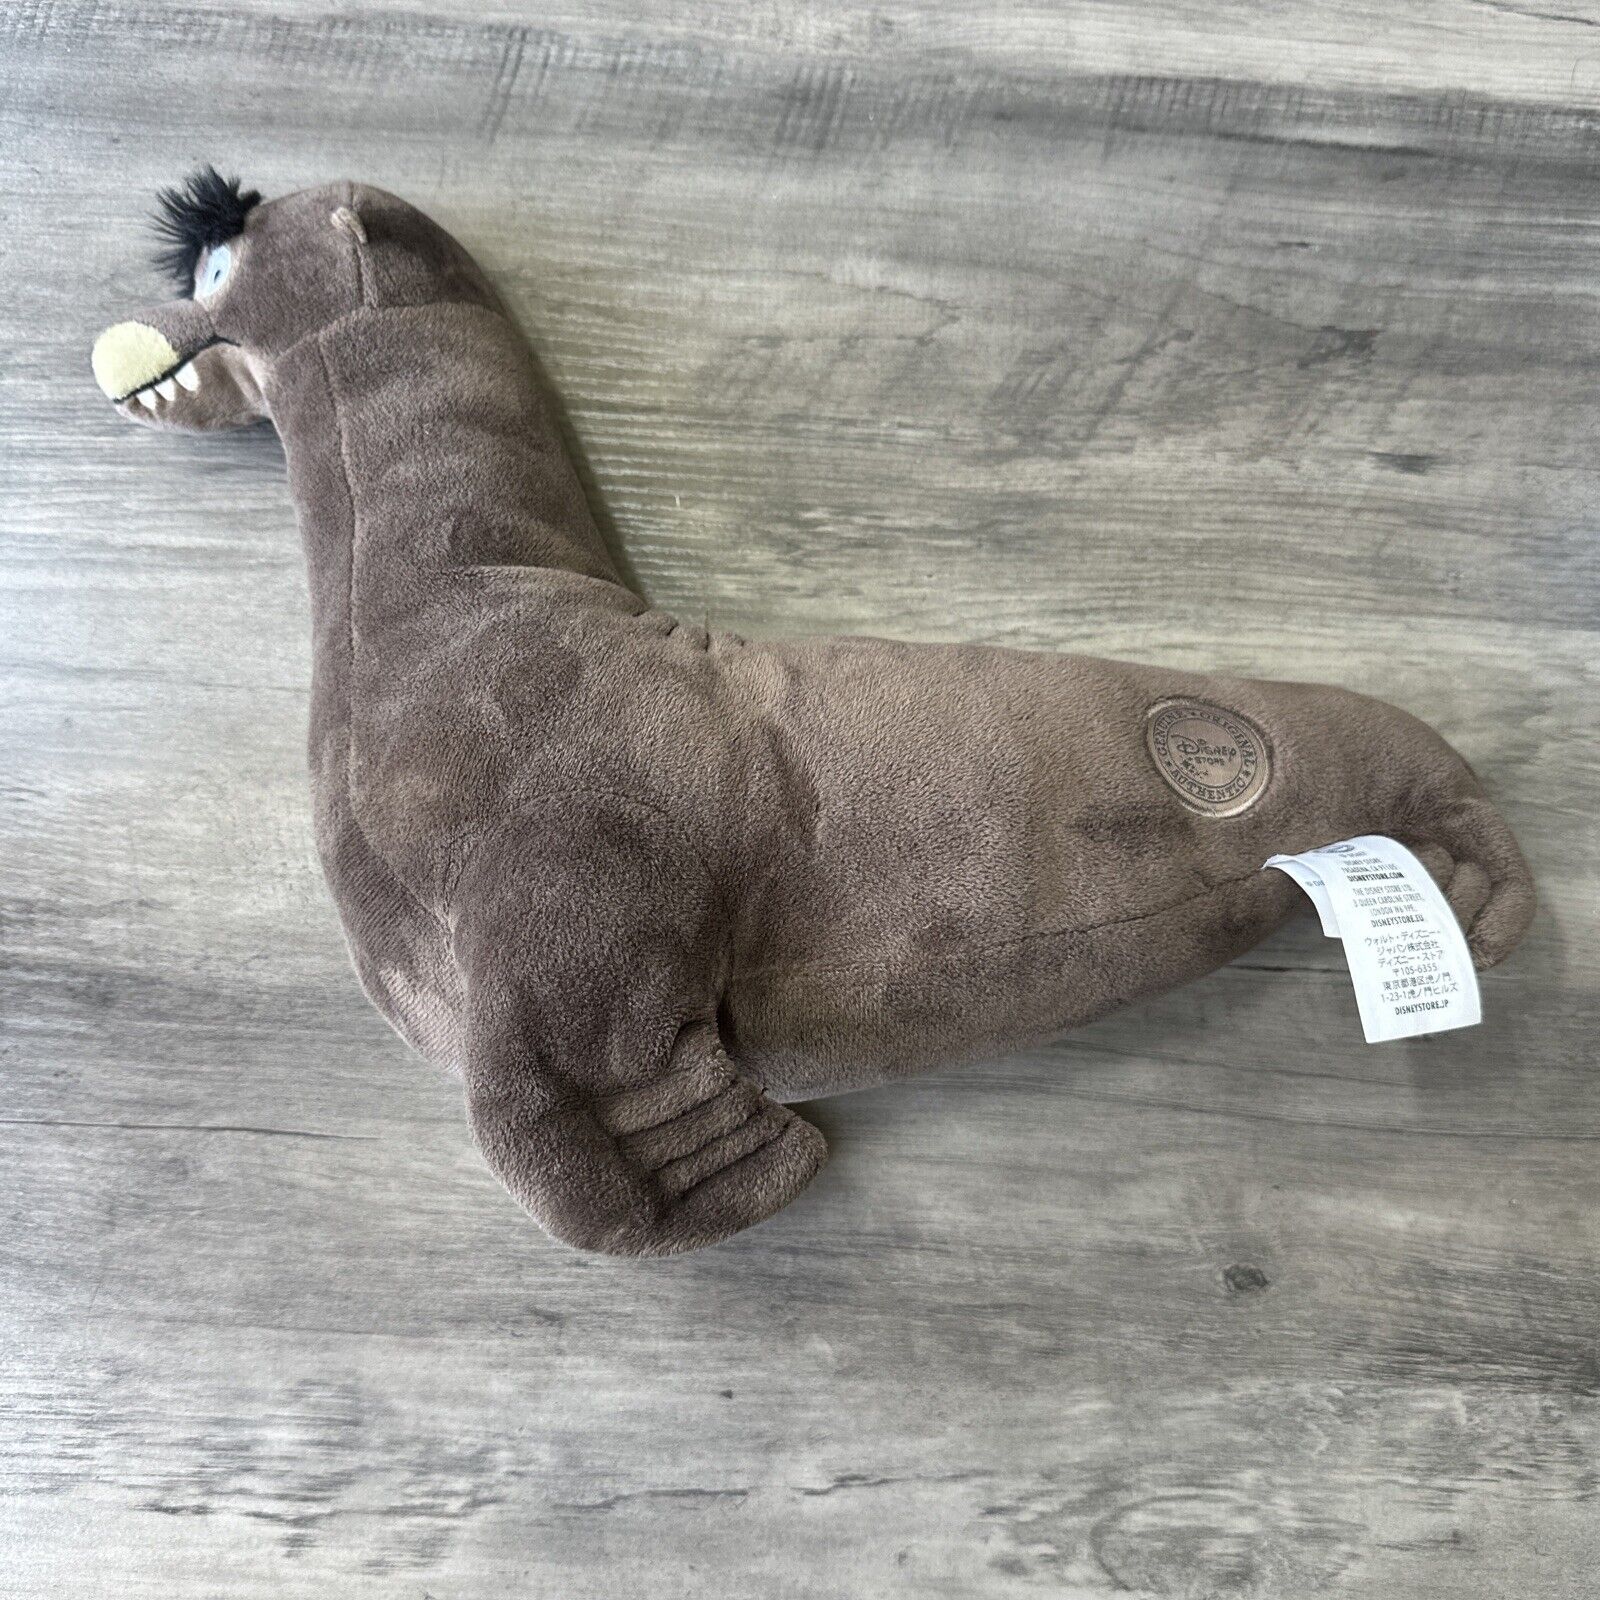 RARE LARGE Disney Store Gerald The Sealion Finding Dory Seal Soft Toy Plush